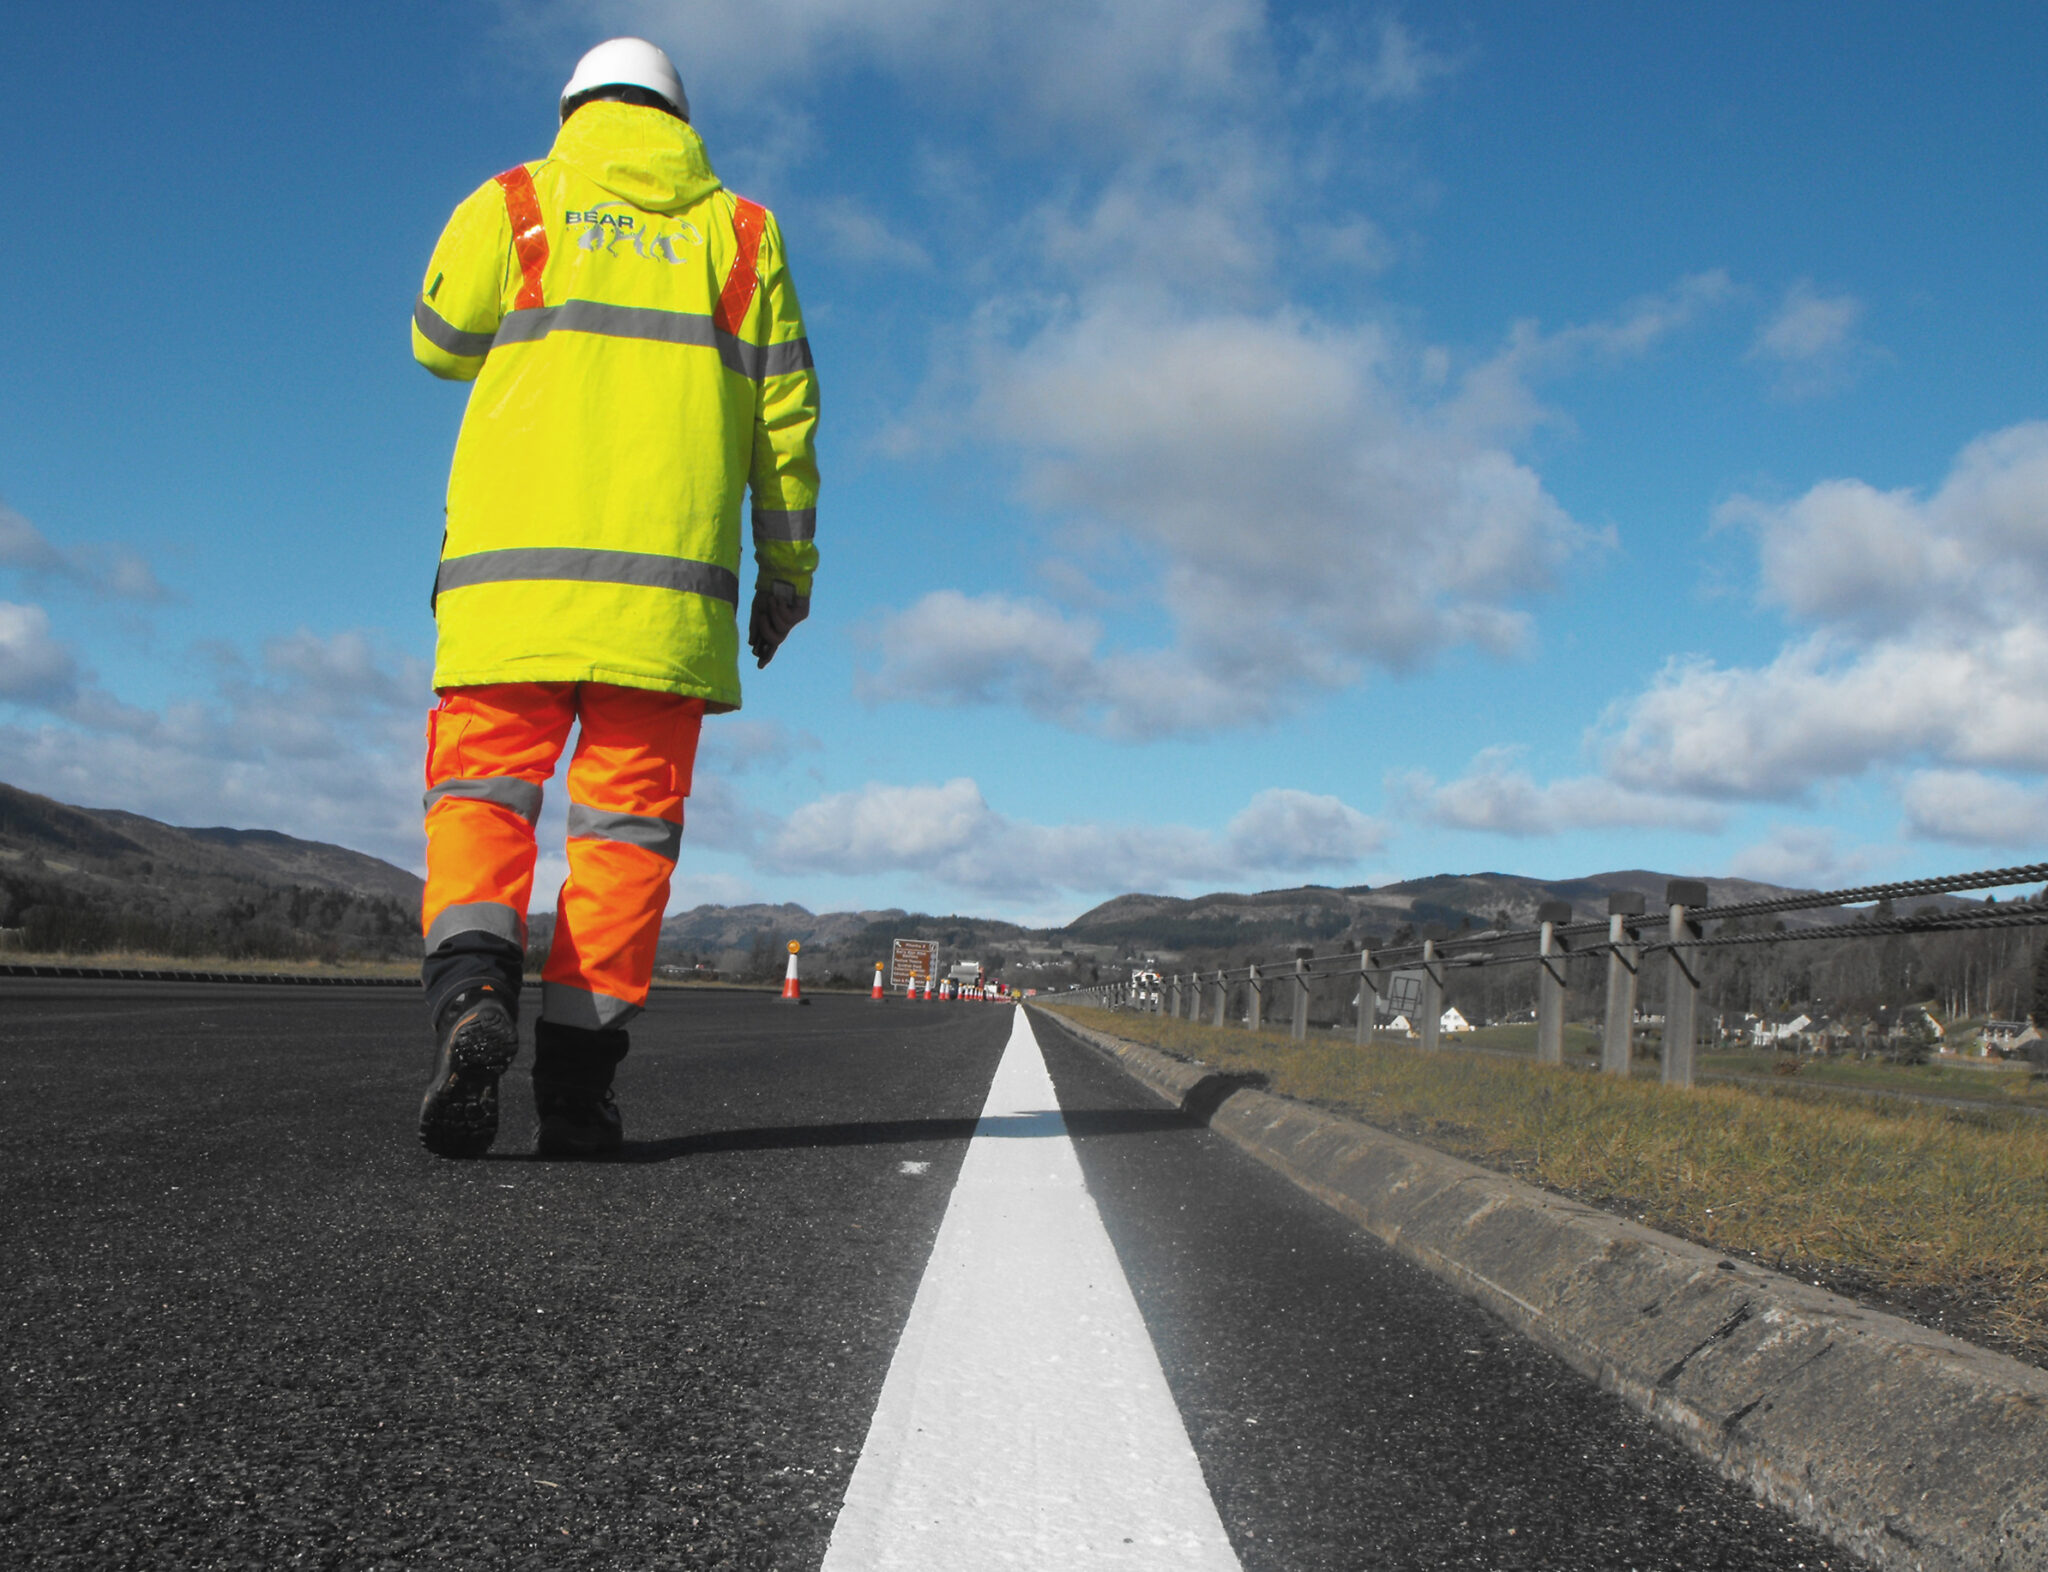 OVERNIGHT SURFACING IMPROVEMENTS PLANNED FOR THE A9 SOUTH OF EVANTON